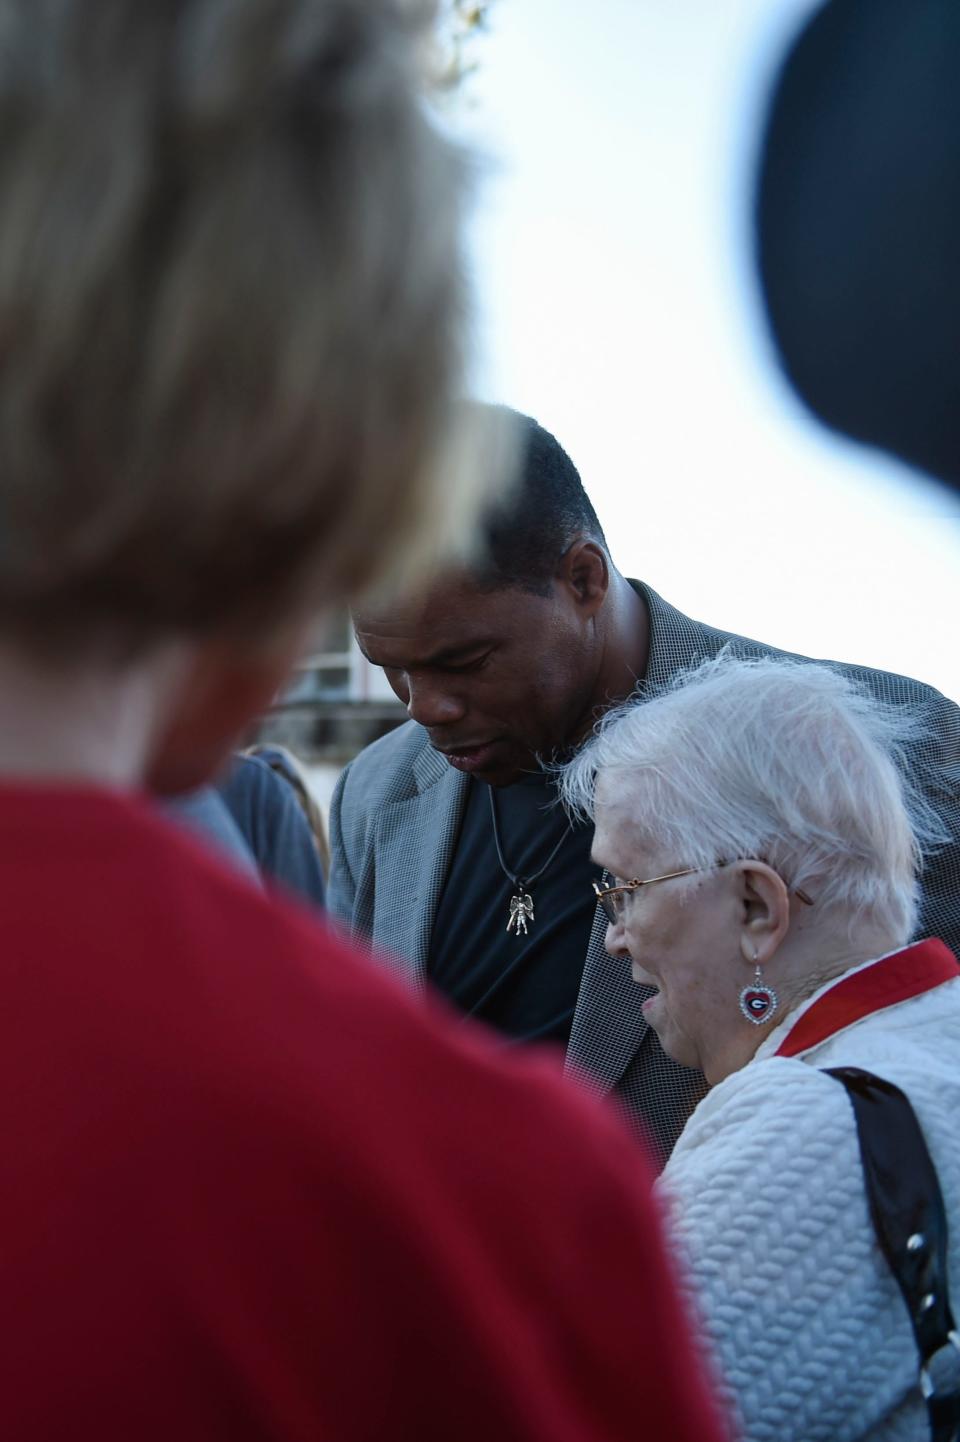 U.S. Senate candidate Herschel Walker speaks with Mary Boles, of West Augusta, during a campaign event at the Columbia County GOP Headquarters in Martinez on Friday, Nov. 12, 2021.